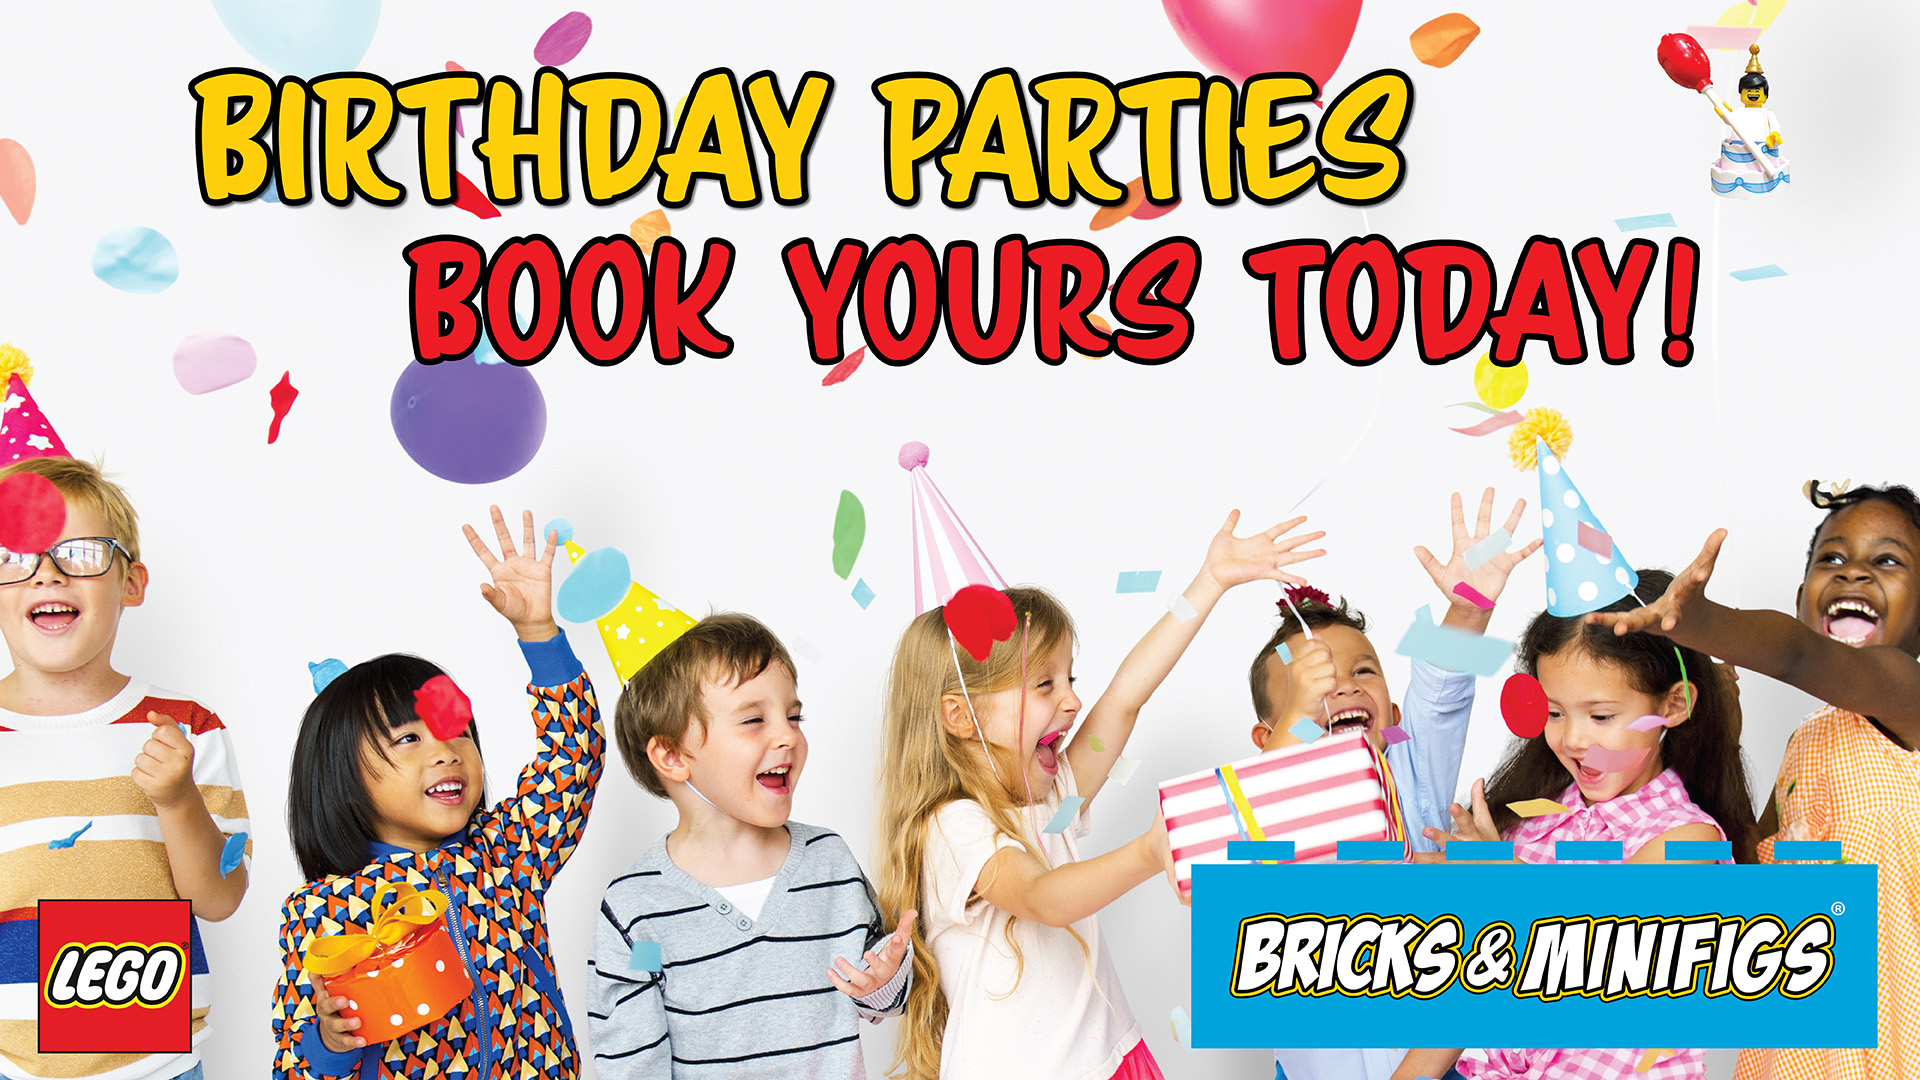 Promotional Image of Birthday Parties